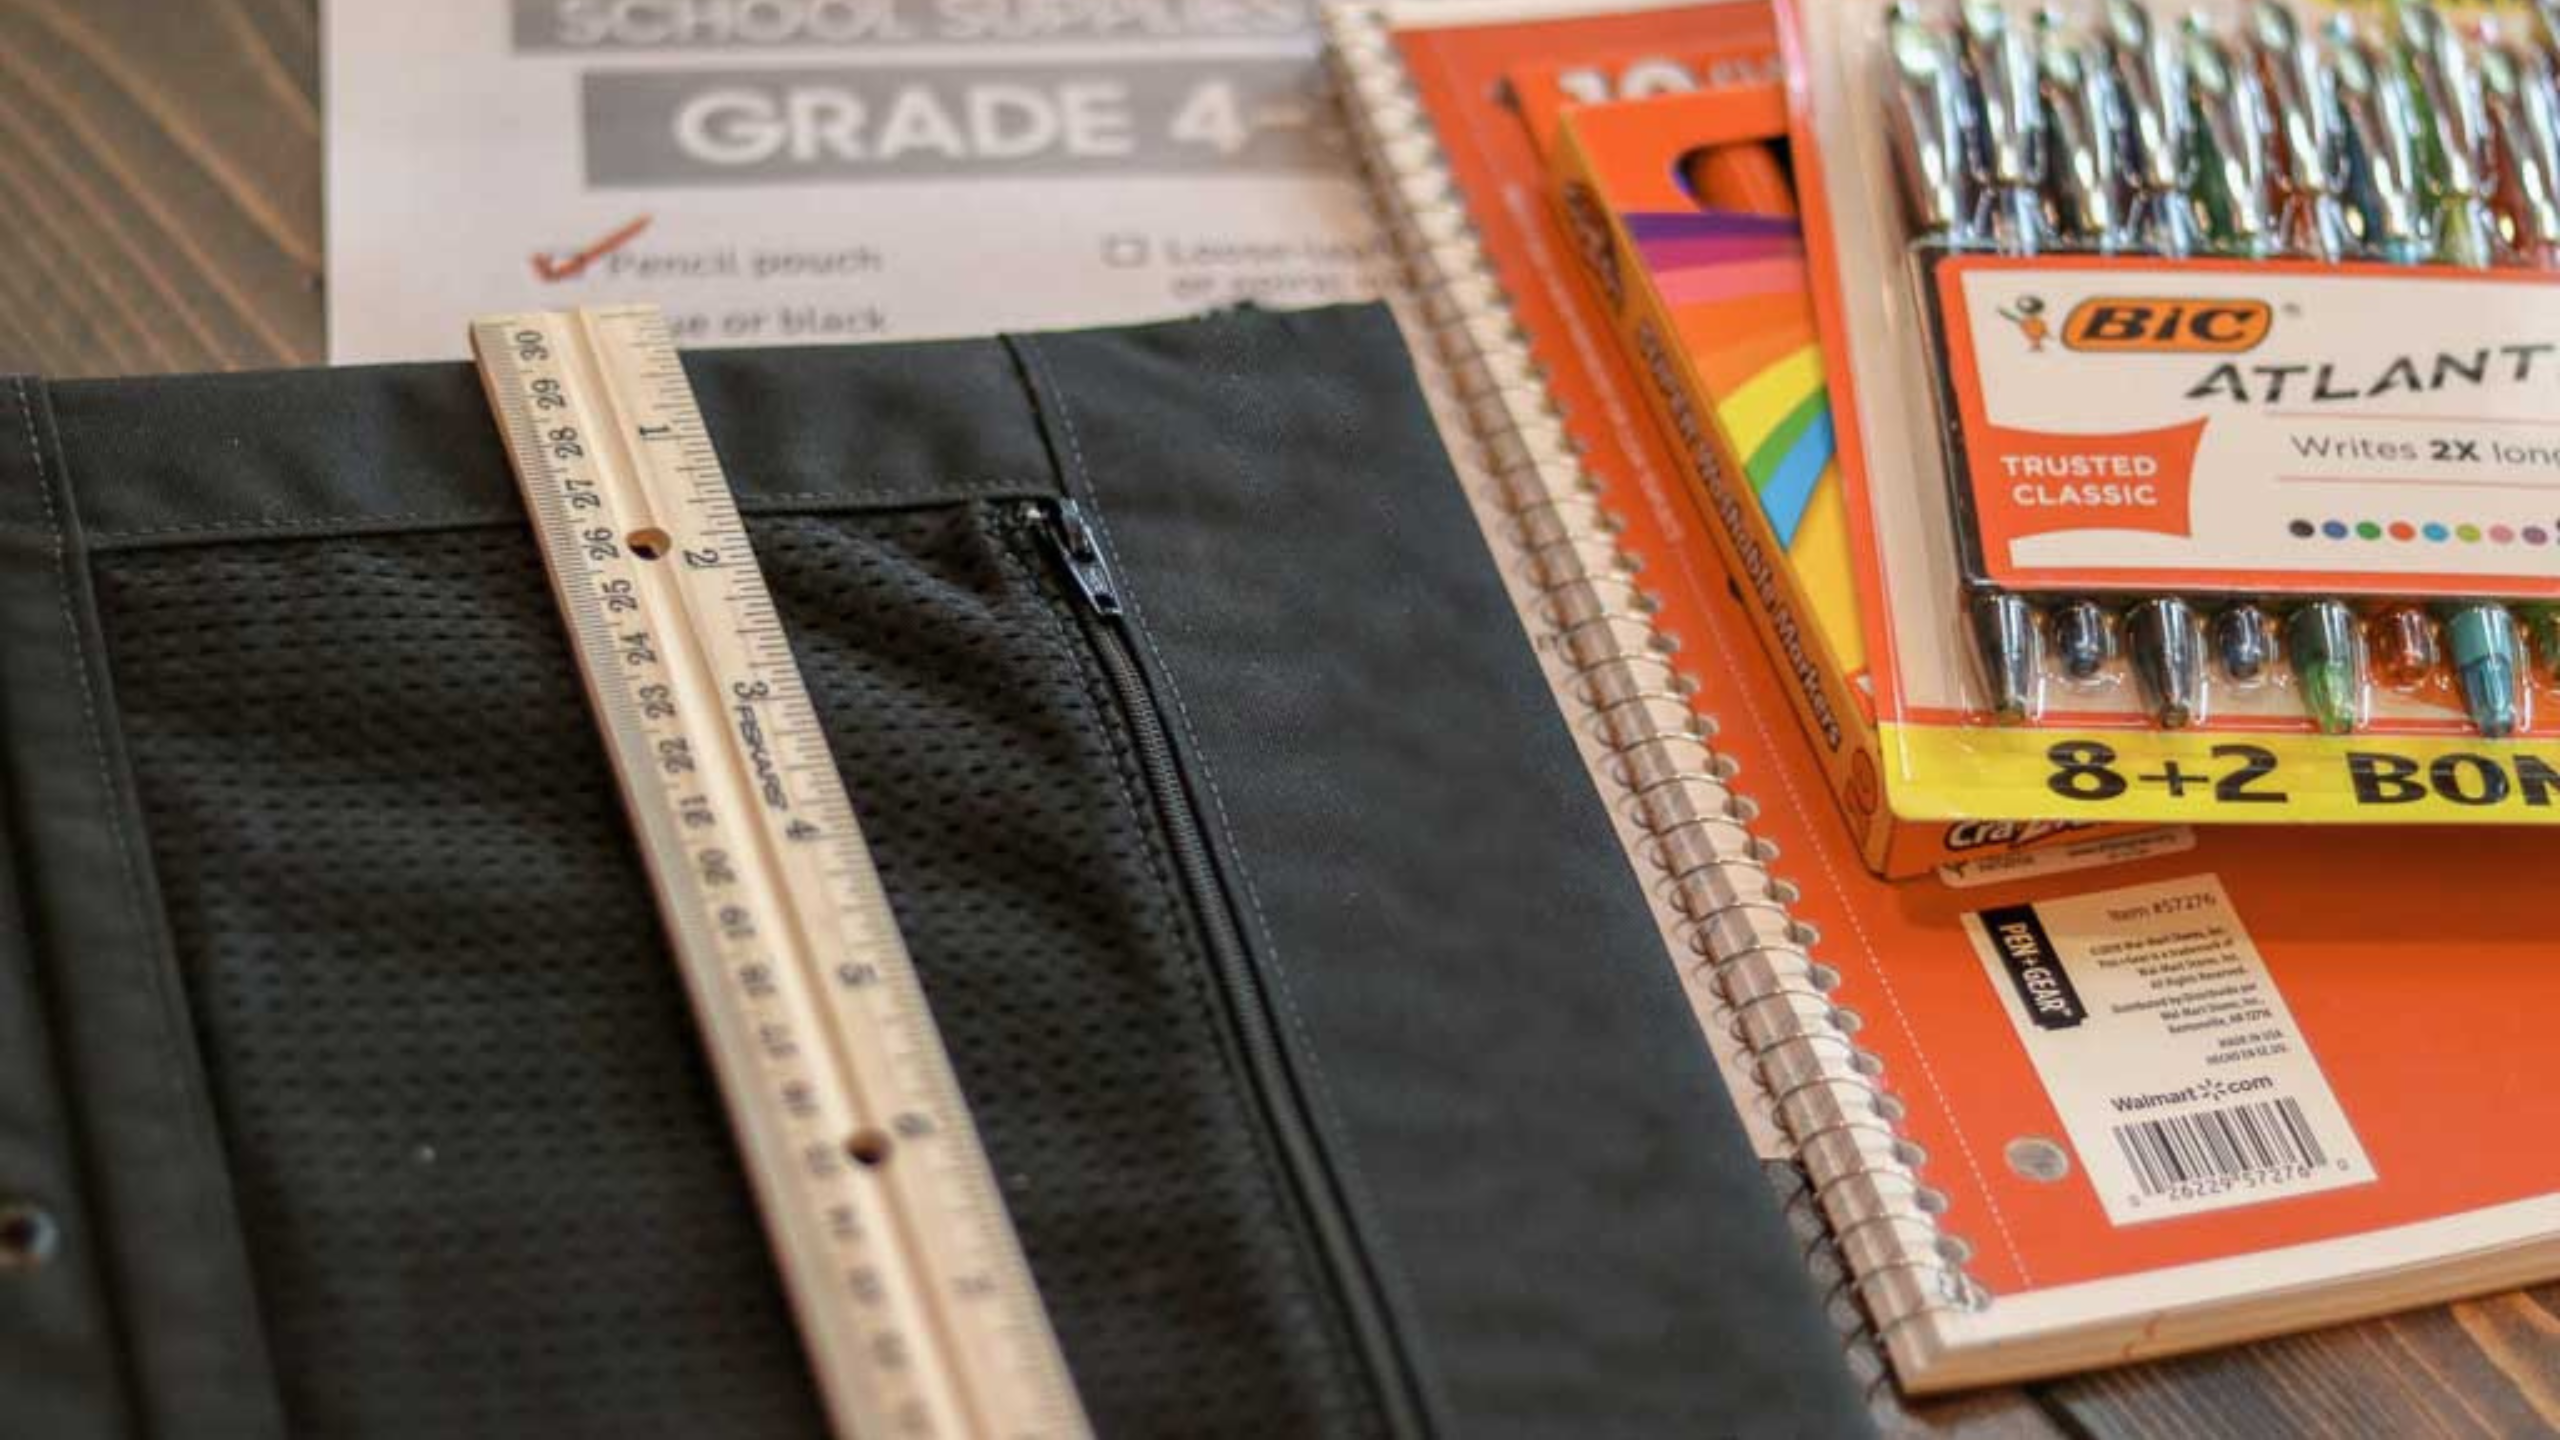 bulletproof pencil pouch that fits in a binder. fully functional